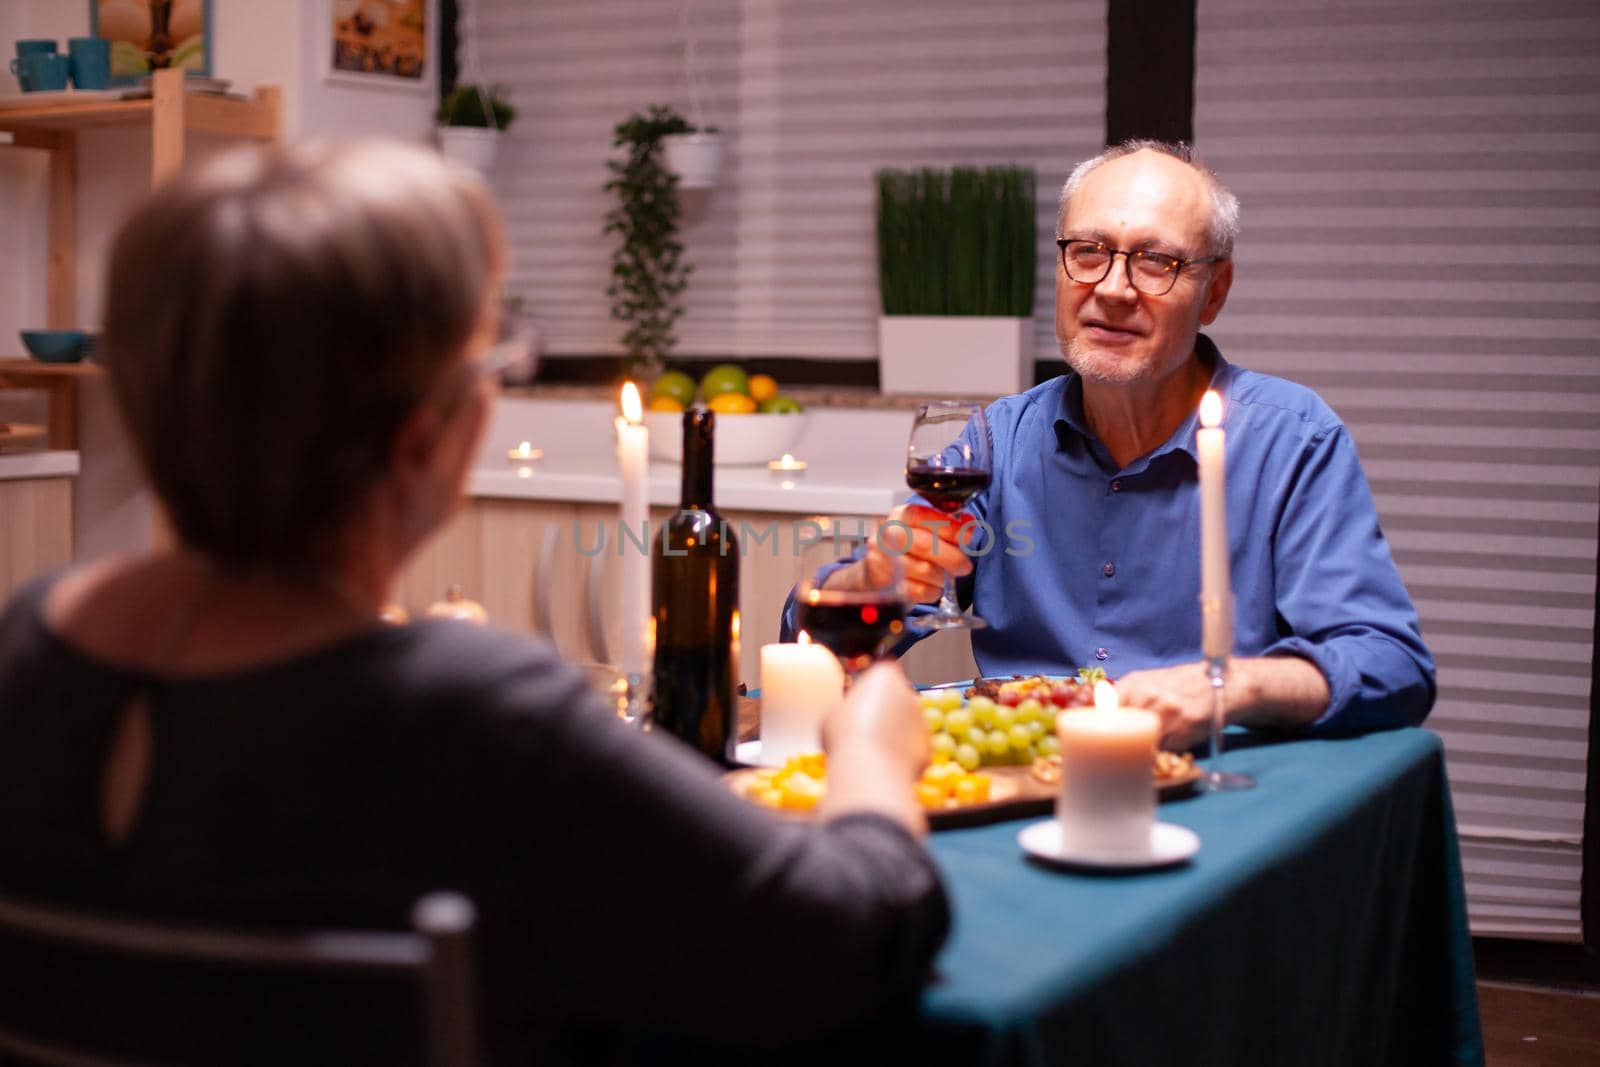 Senior man telling a story to his wife while celebrating in kitchen with wine and food. Senior couple sitting at the table in dining room , talking, enjoying the meal, celebrating their anniversary in the dining room.